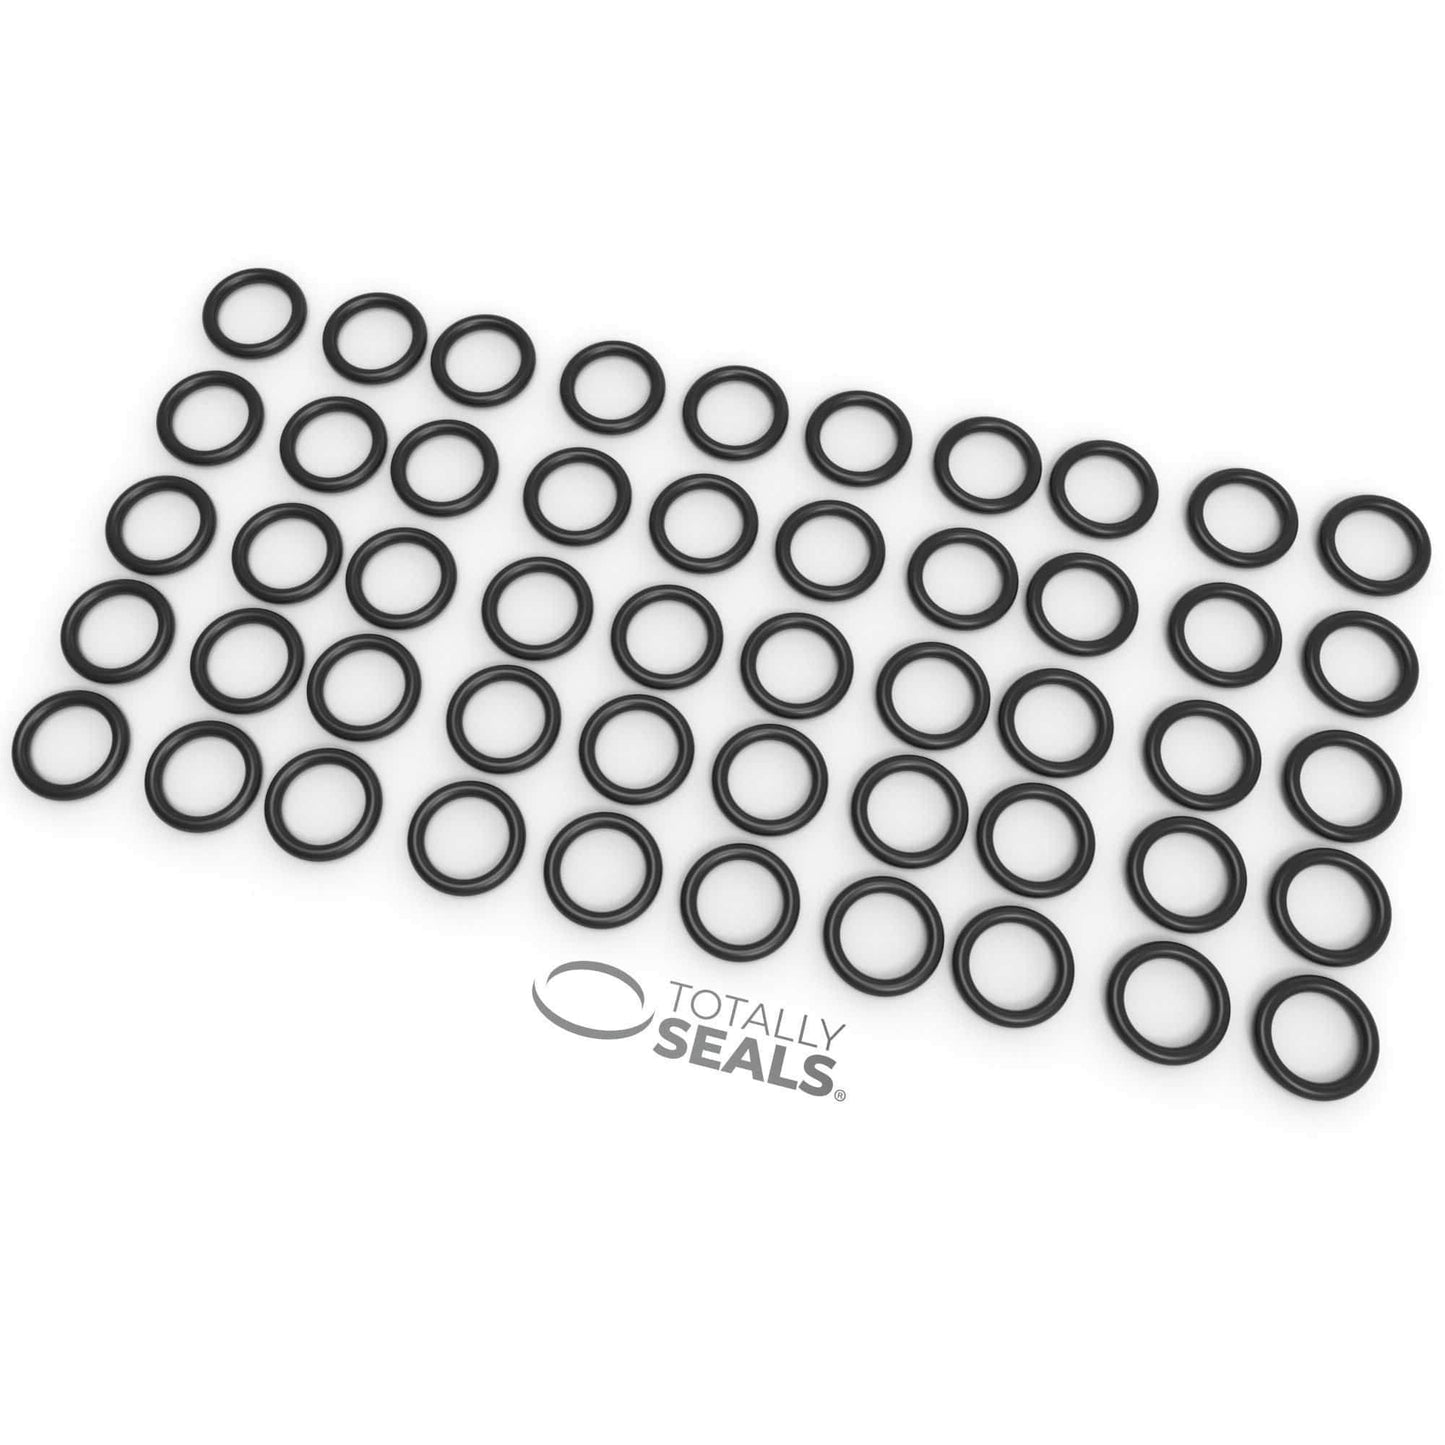 1-3/4" x 3/16" (BS327) Imperial Nitrile O-Rings - Totally Seals®